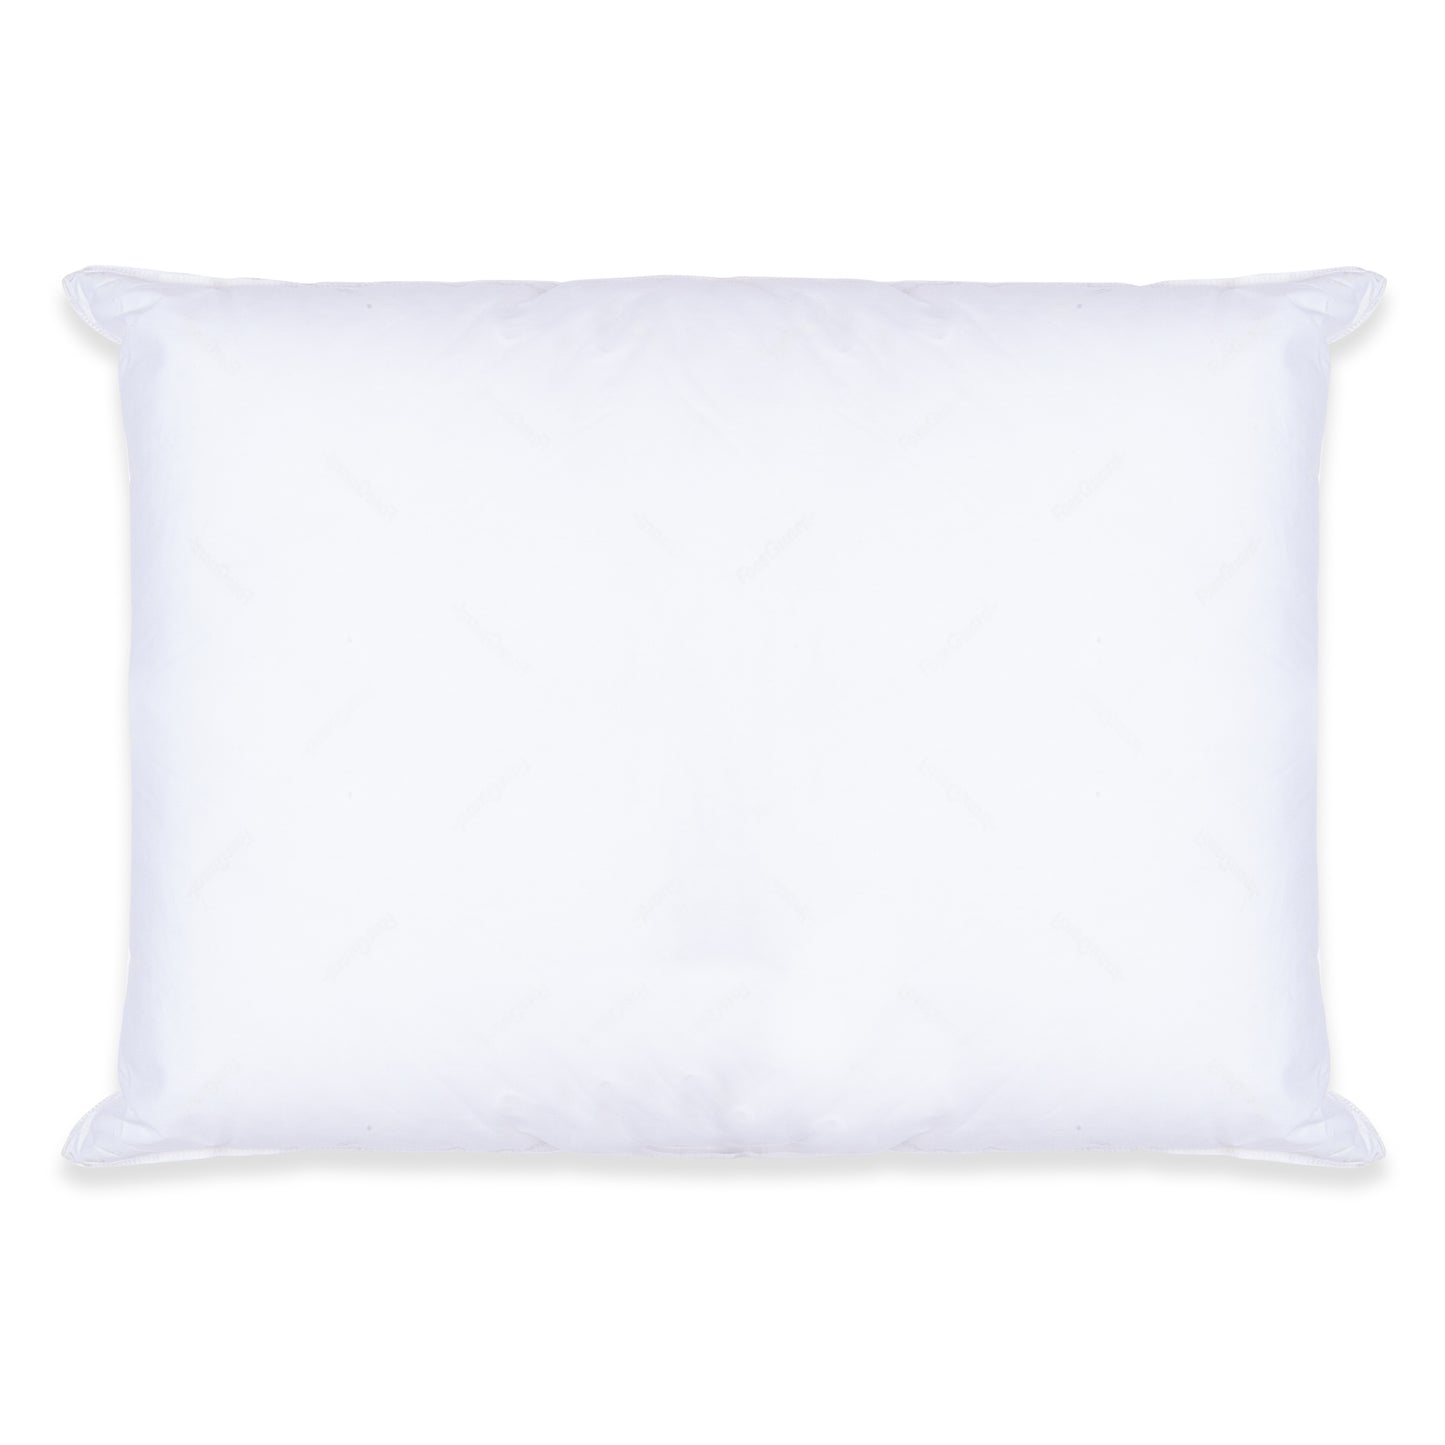 Pillow 21 x 27 Fossfill Washable, White